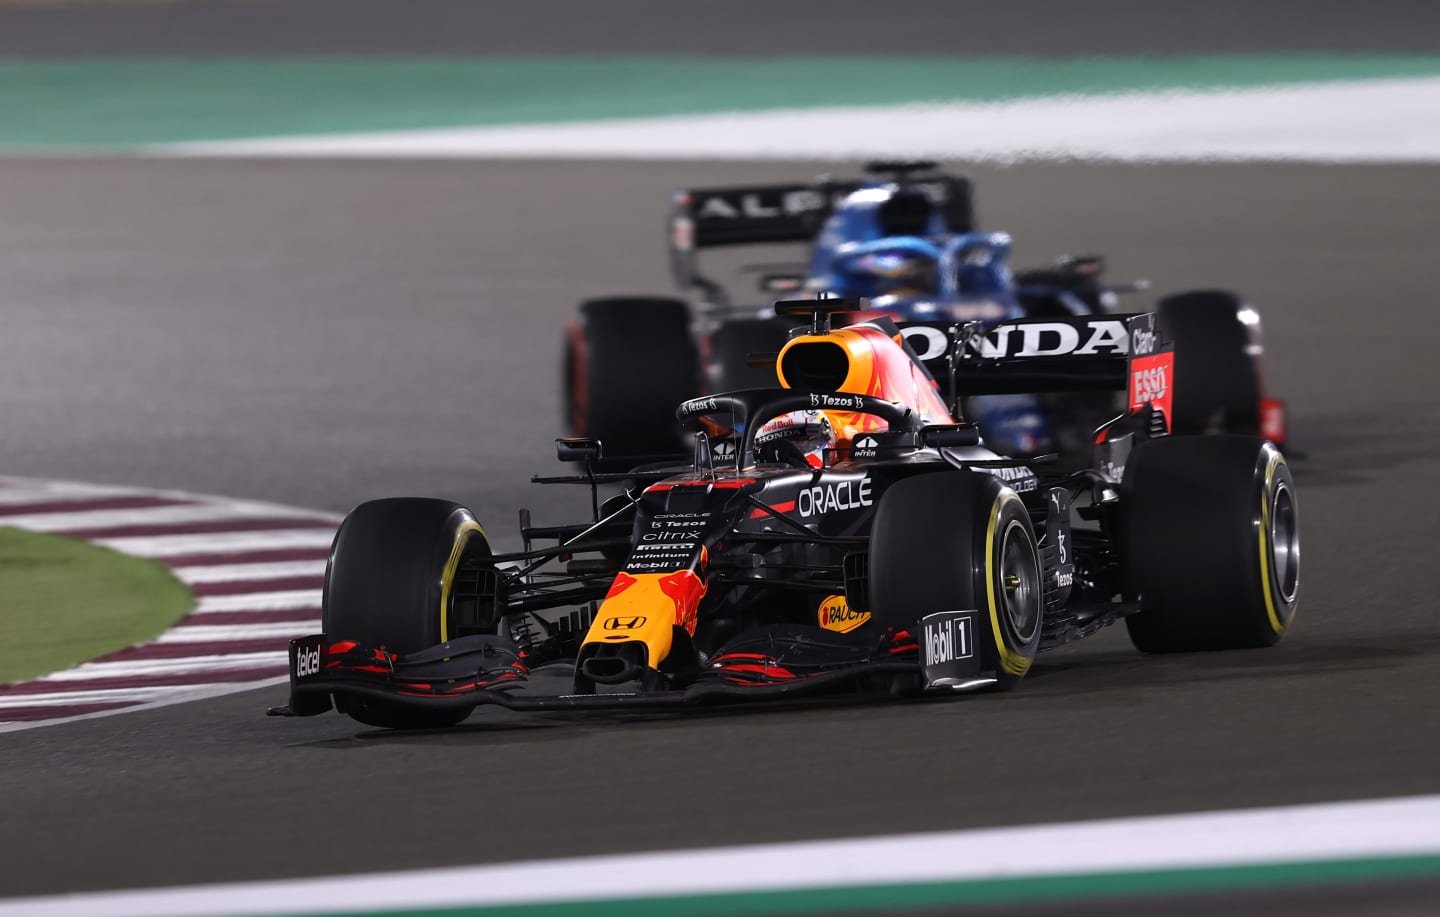 DOHA, QATAR - NOVEMBER 21: Max Verstappen of the Netherlands driving the (33) Red Bull Racing RB16B Honda leads Fernando Alonso of Spain driving the (14) Alpine A521 Renault during the F1 Grand Prix of Qatar at Losail International Circuit on November 21, 2021 in Doha, Qatar. (Photo by Lars Baron/Getty Images)